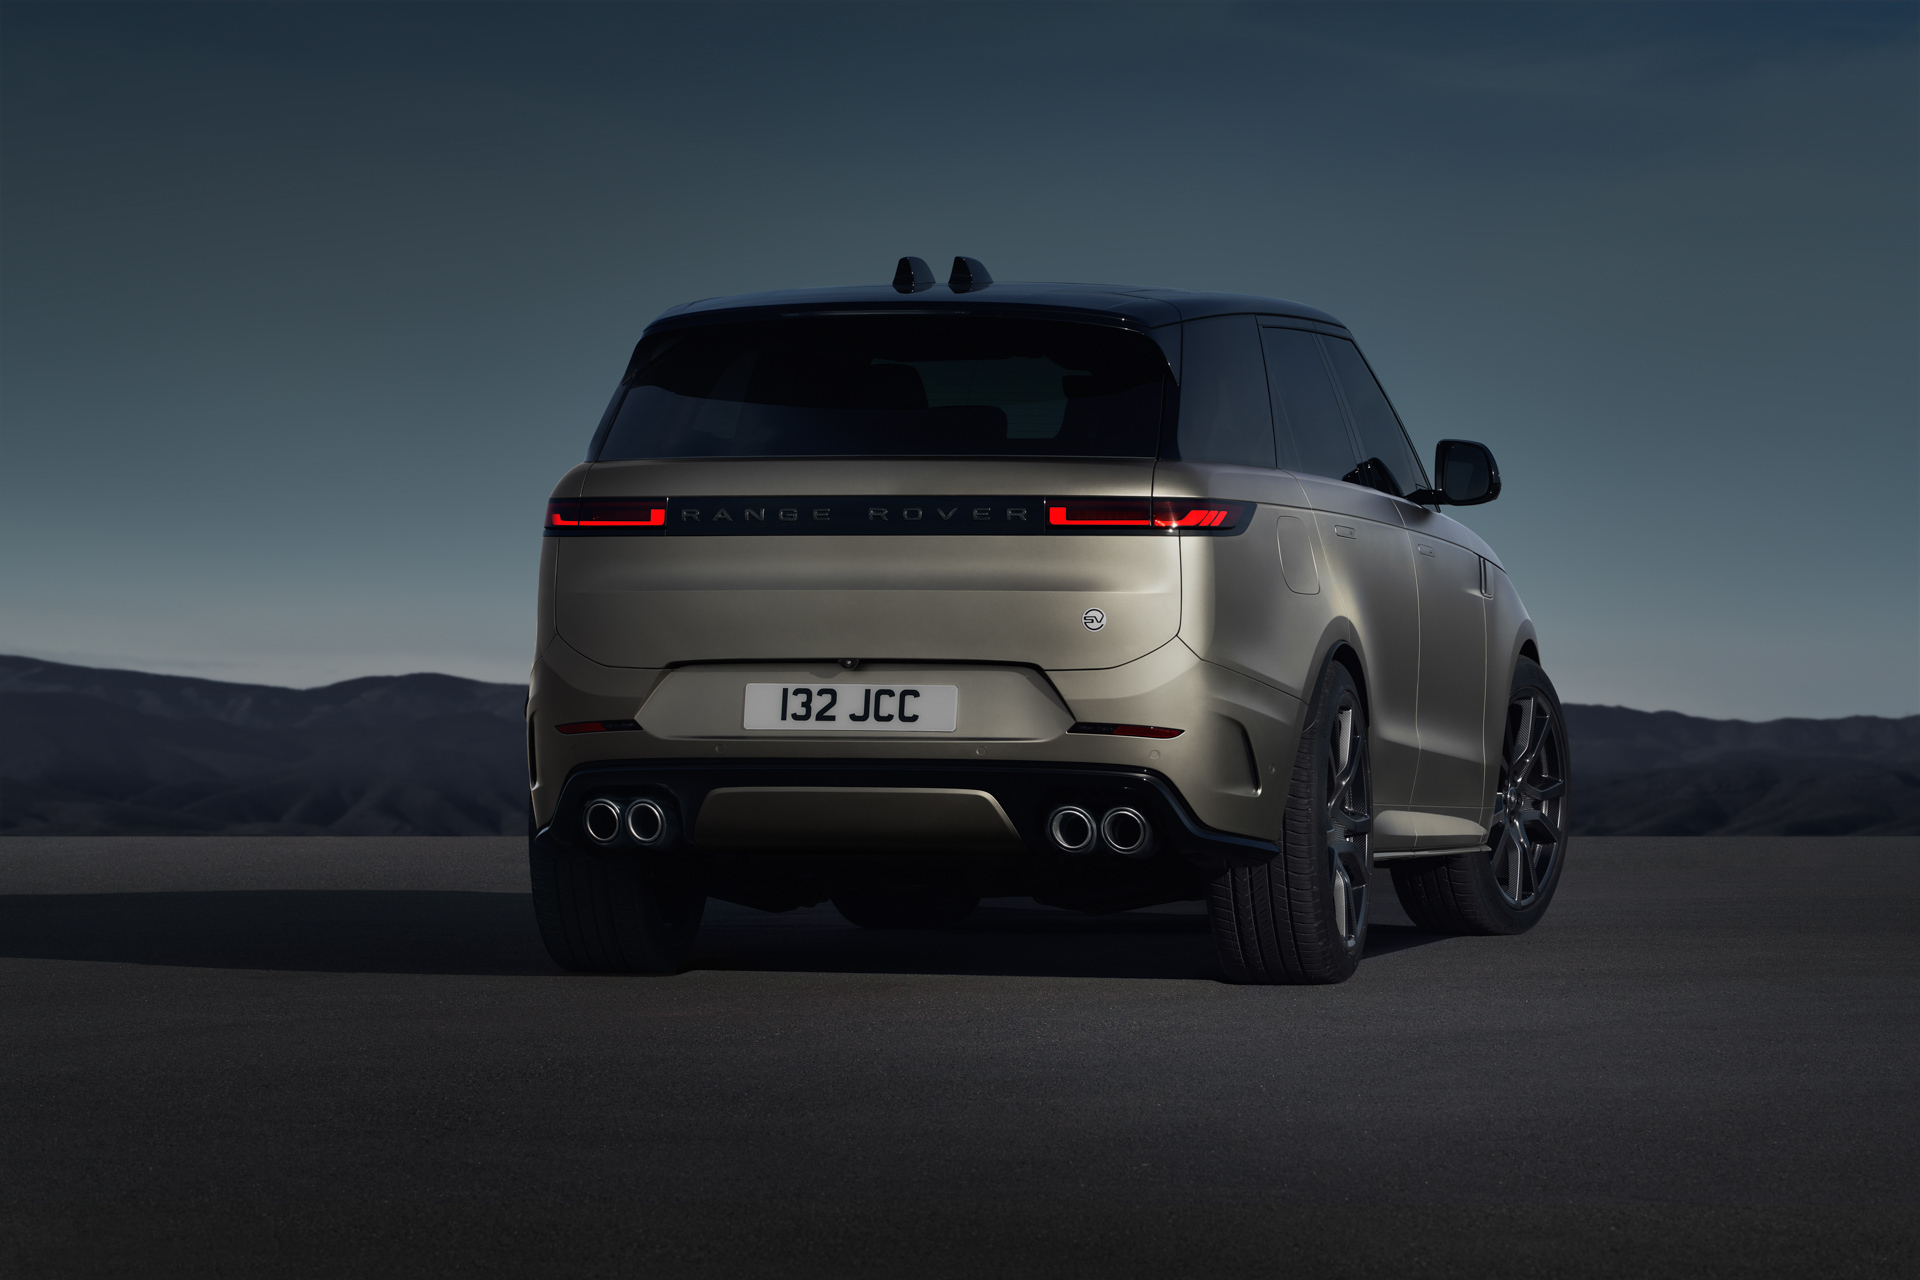 2024 Range Rover Sport SV Is A 180 MPH Super SUV With A 626HP BMW V8 And MusicJiggling Seats